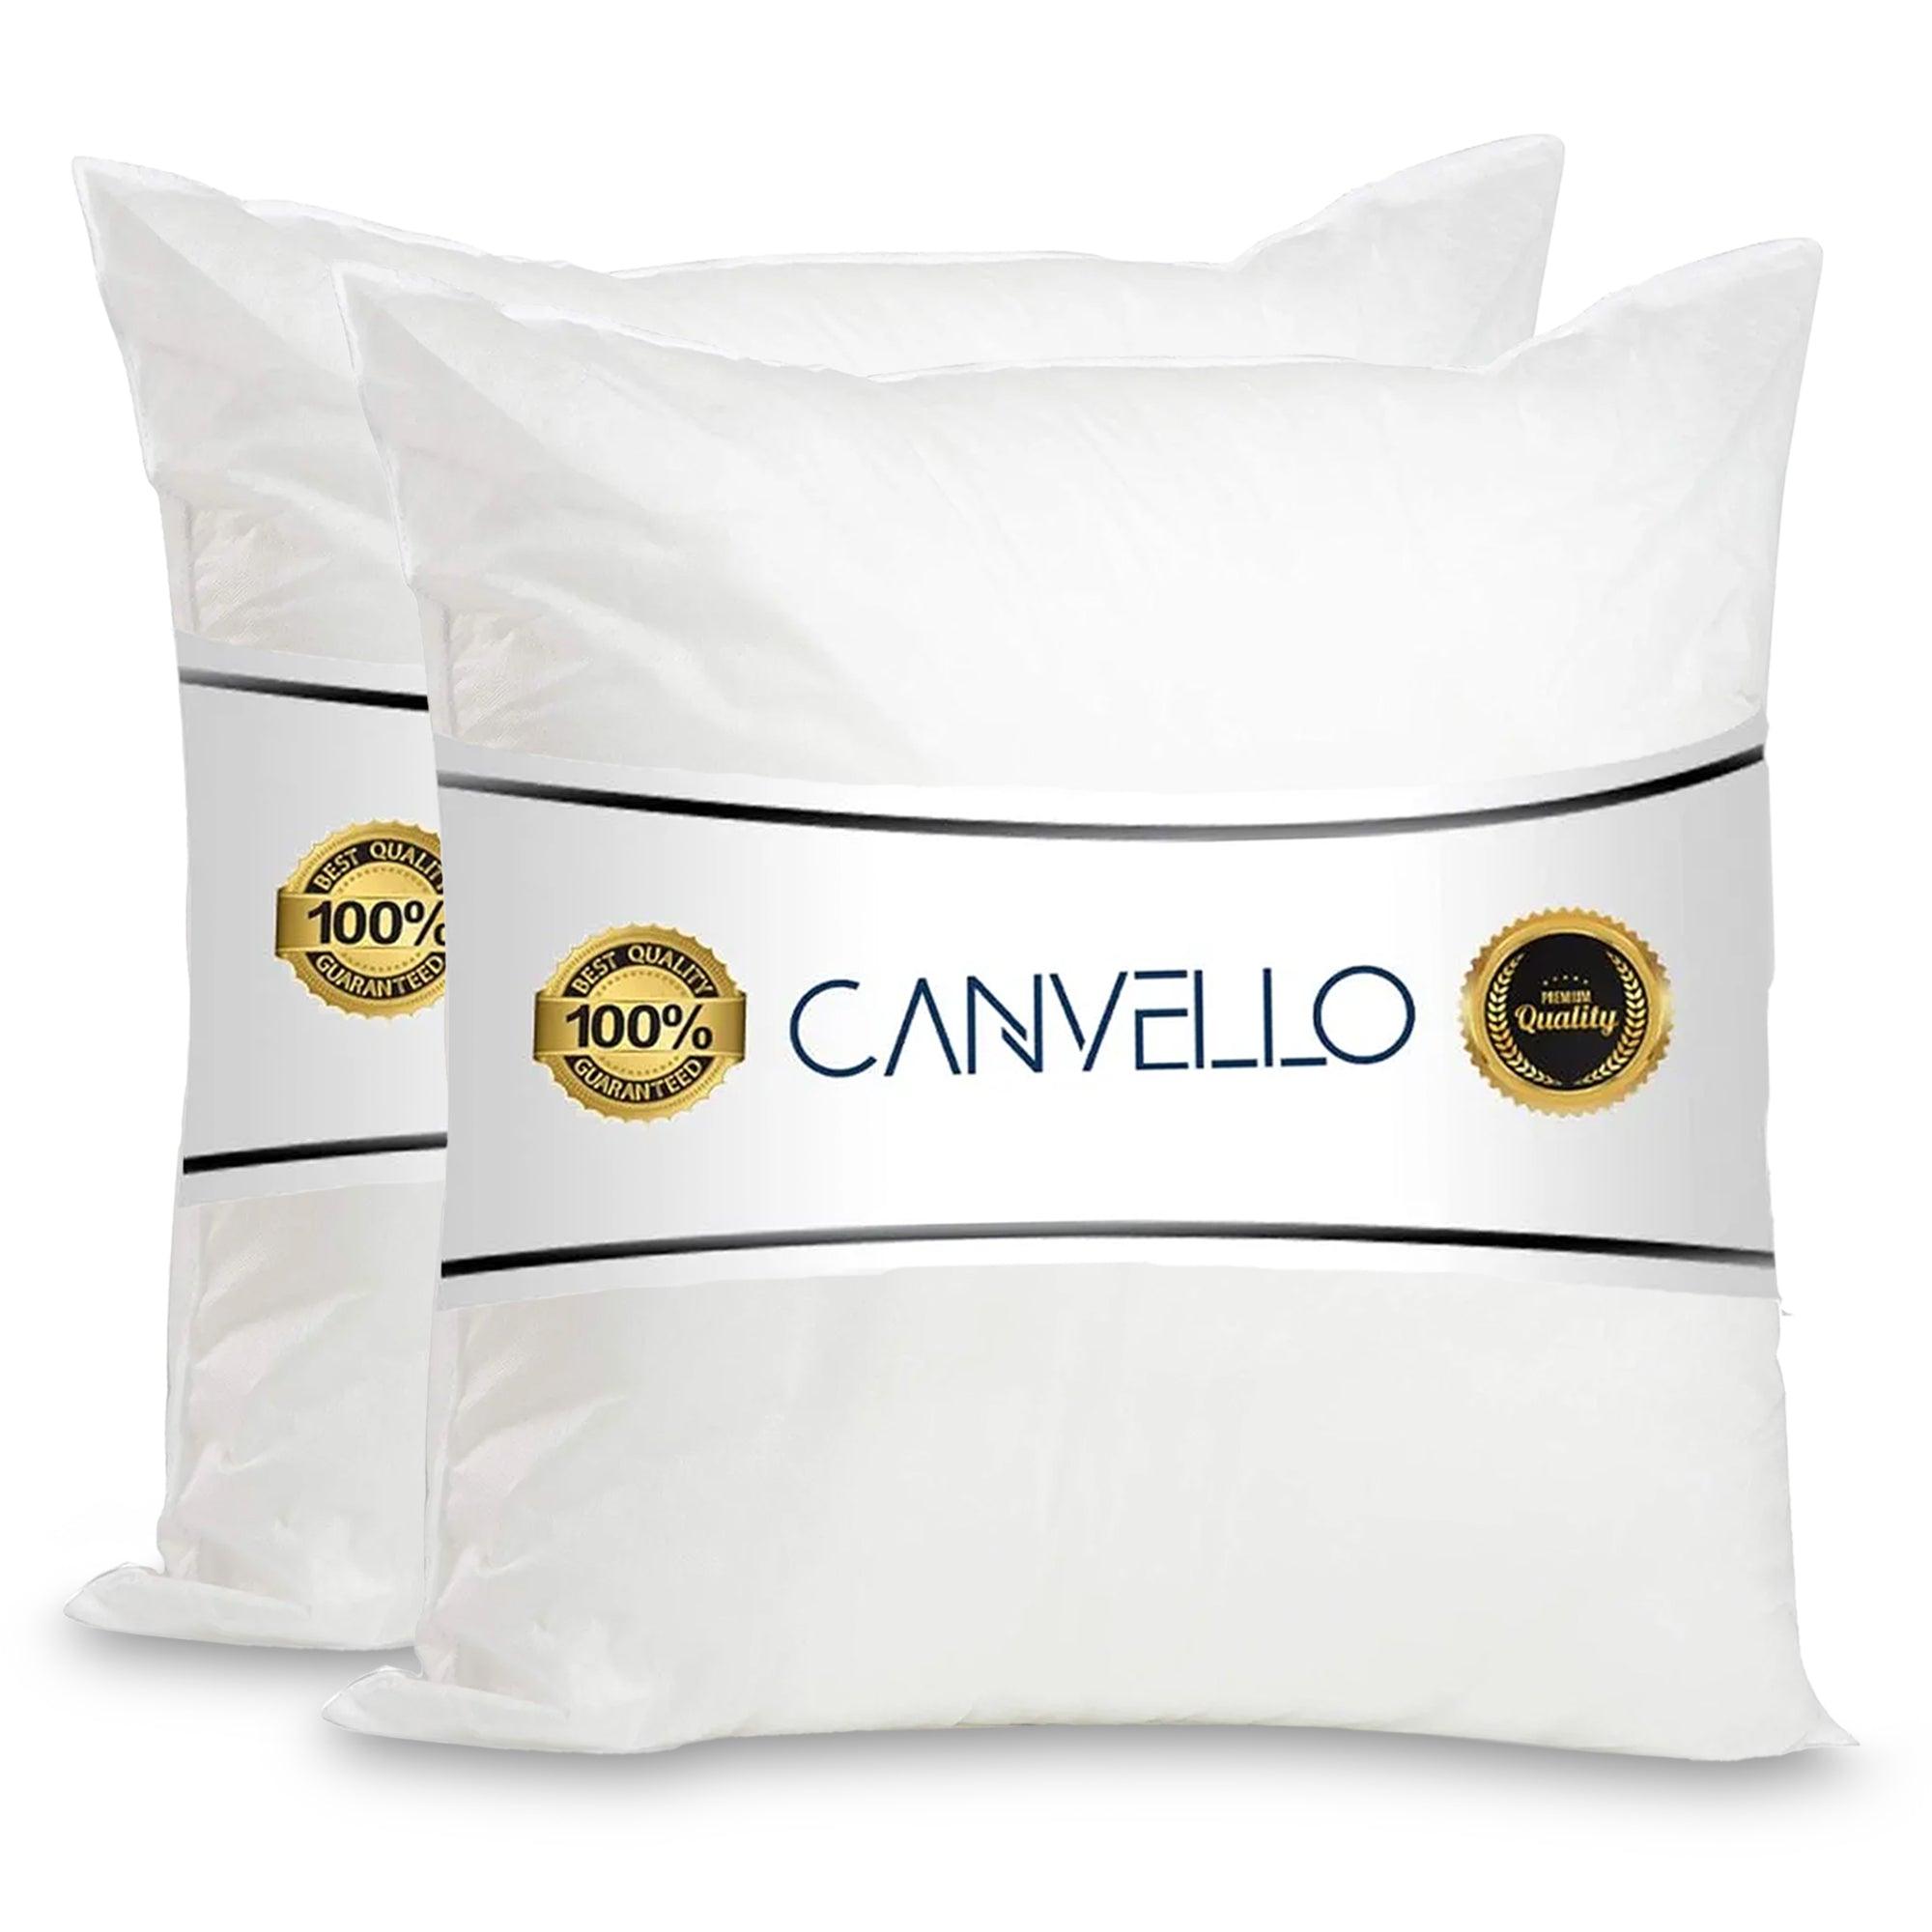 https://canvellostudio.com/cdn/shop/files/canvello-decorative-pillow-inserts-throw-pillow-insert-down-feather-fill-for-extra-fluff-with-233-thread-count-100percent-cotton-cover-quality-checked-in-u-s-a-canvello-19_6e52043a-dc39-41b2-b1ed-fea6c8ecad06.jpg?v=1688097391